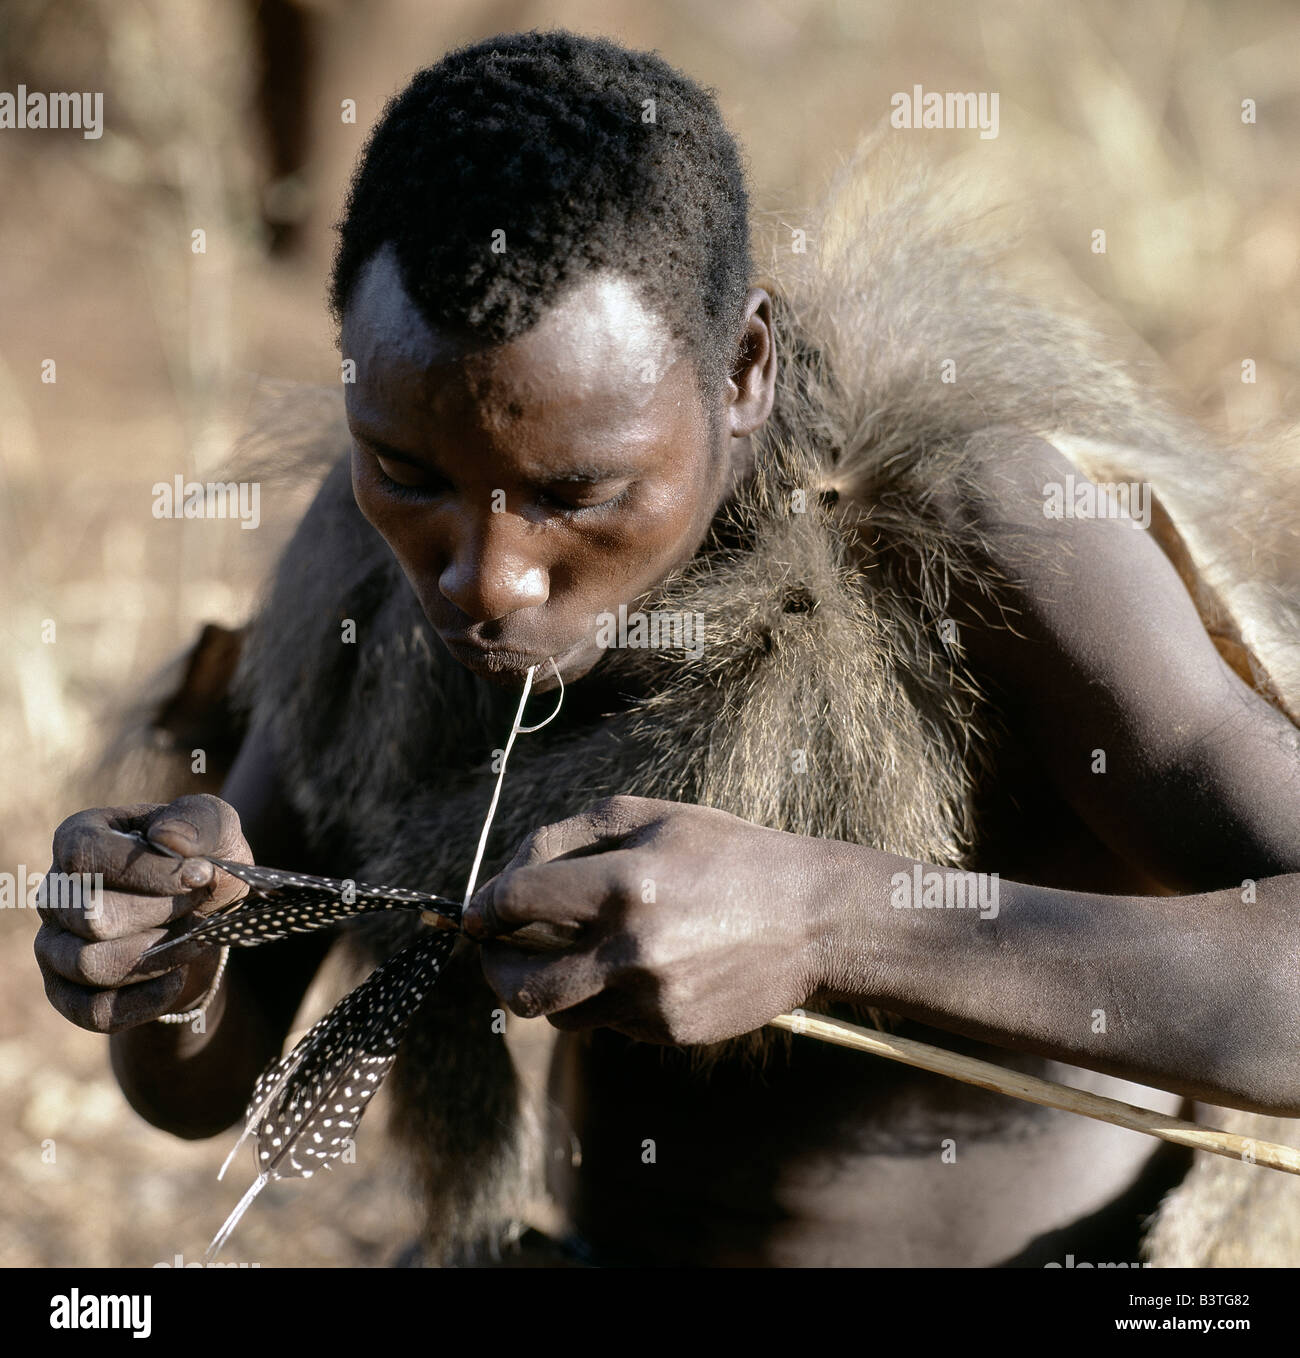 Tanzania, Northern Tanzania, Lake Eyasi. A Hadza hunter wearing a baboon skin fledges an arrow shaft with guinea fowl feathers using the sinews of an antelope.The Hadzabe are a thoUSAnd-strong community of hunter-gatherers who have lived in the Lake Eyasi basin for centuries. They are one of only four or five societies in the world that still earn a living primarily from wild resources.. . Stock Photo